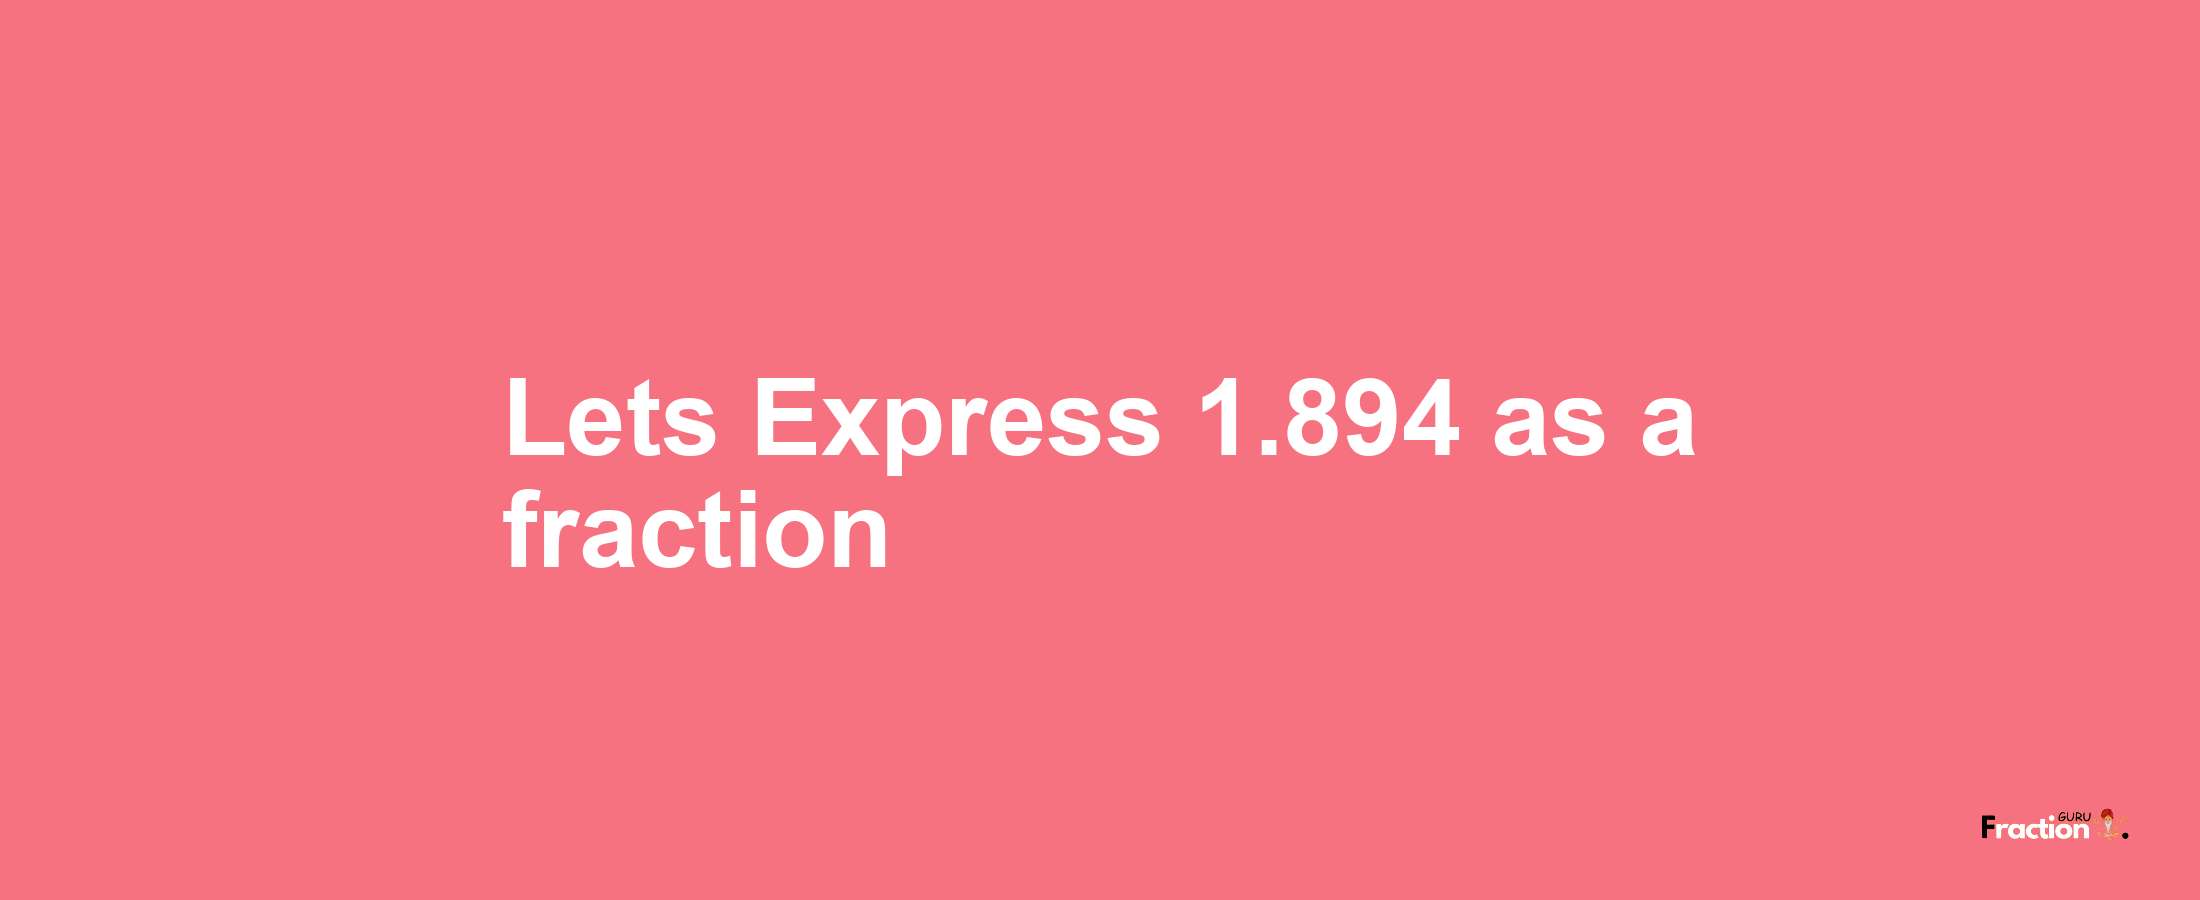 Lets Express 1.894 as afraction